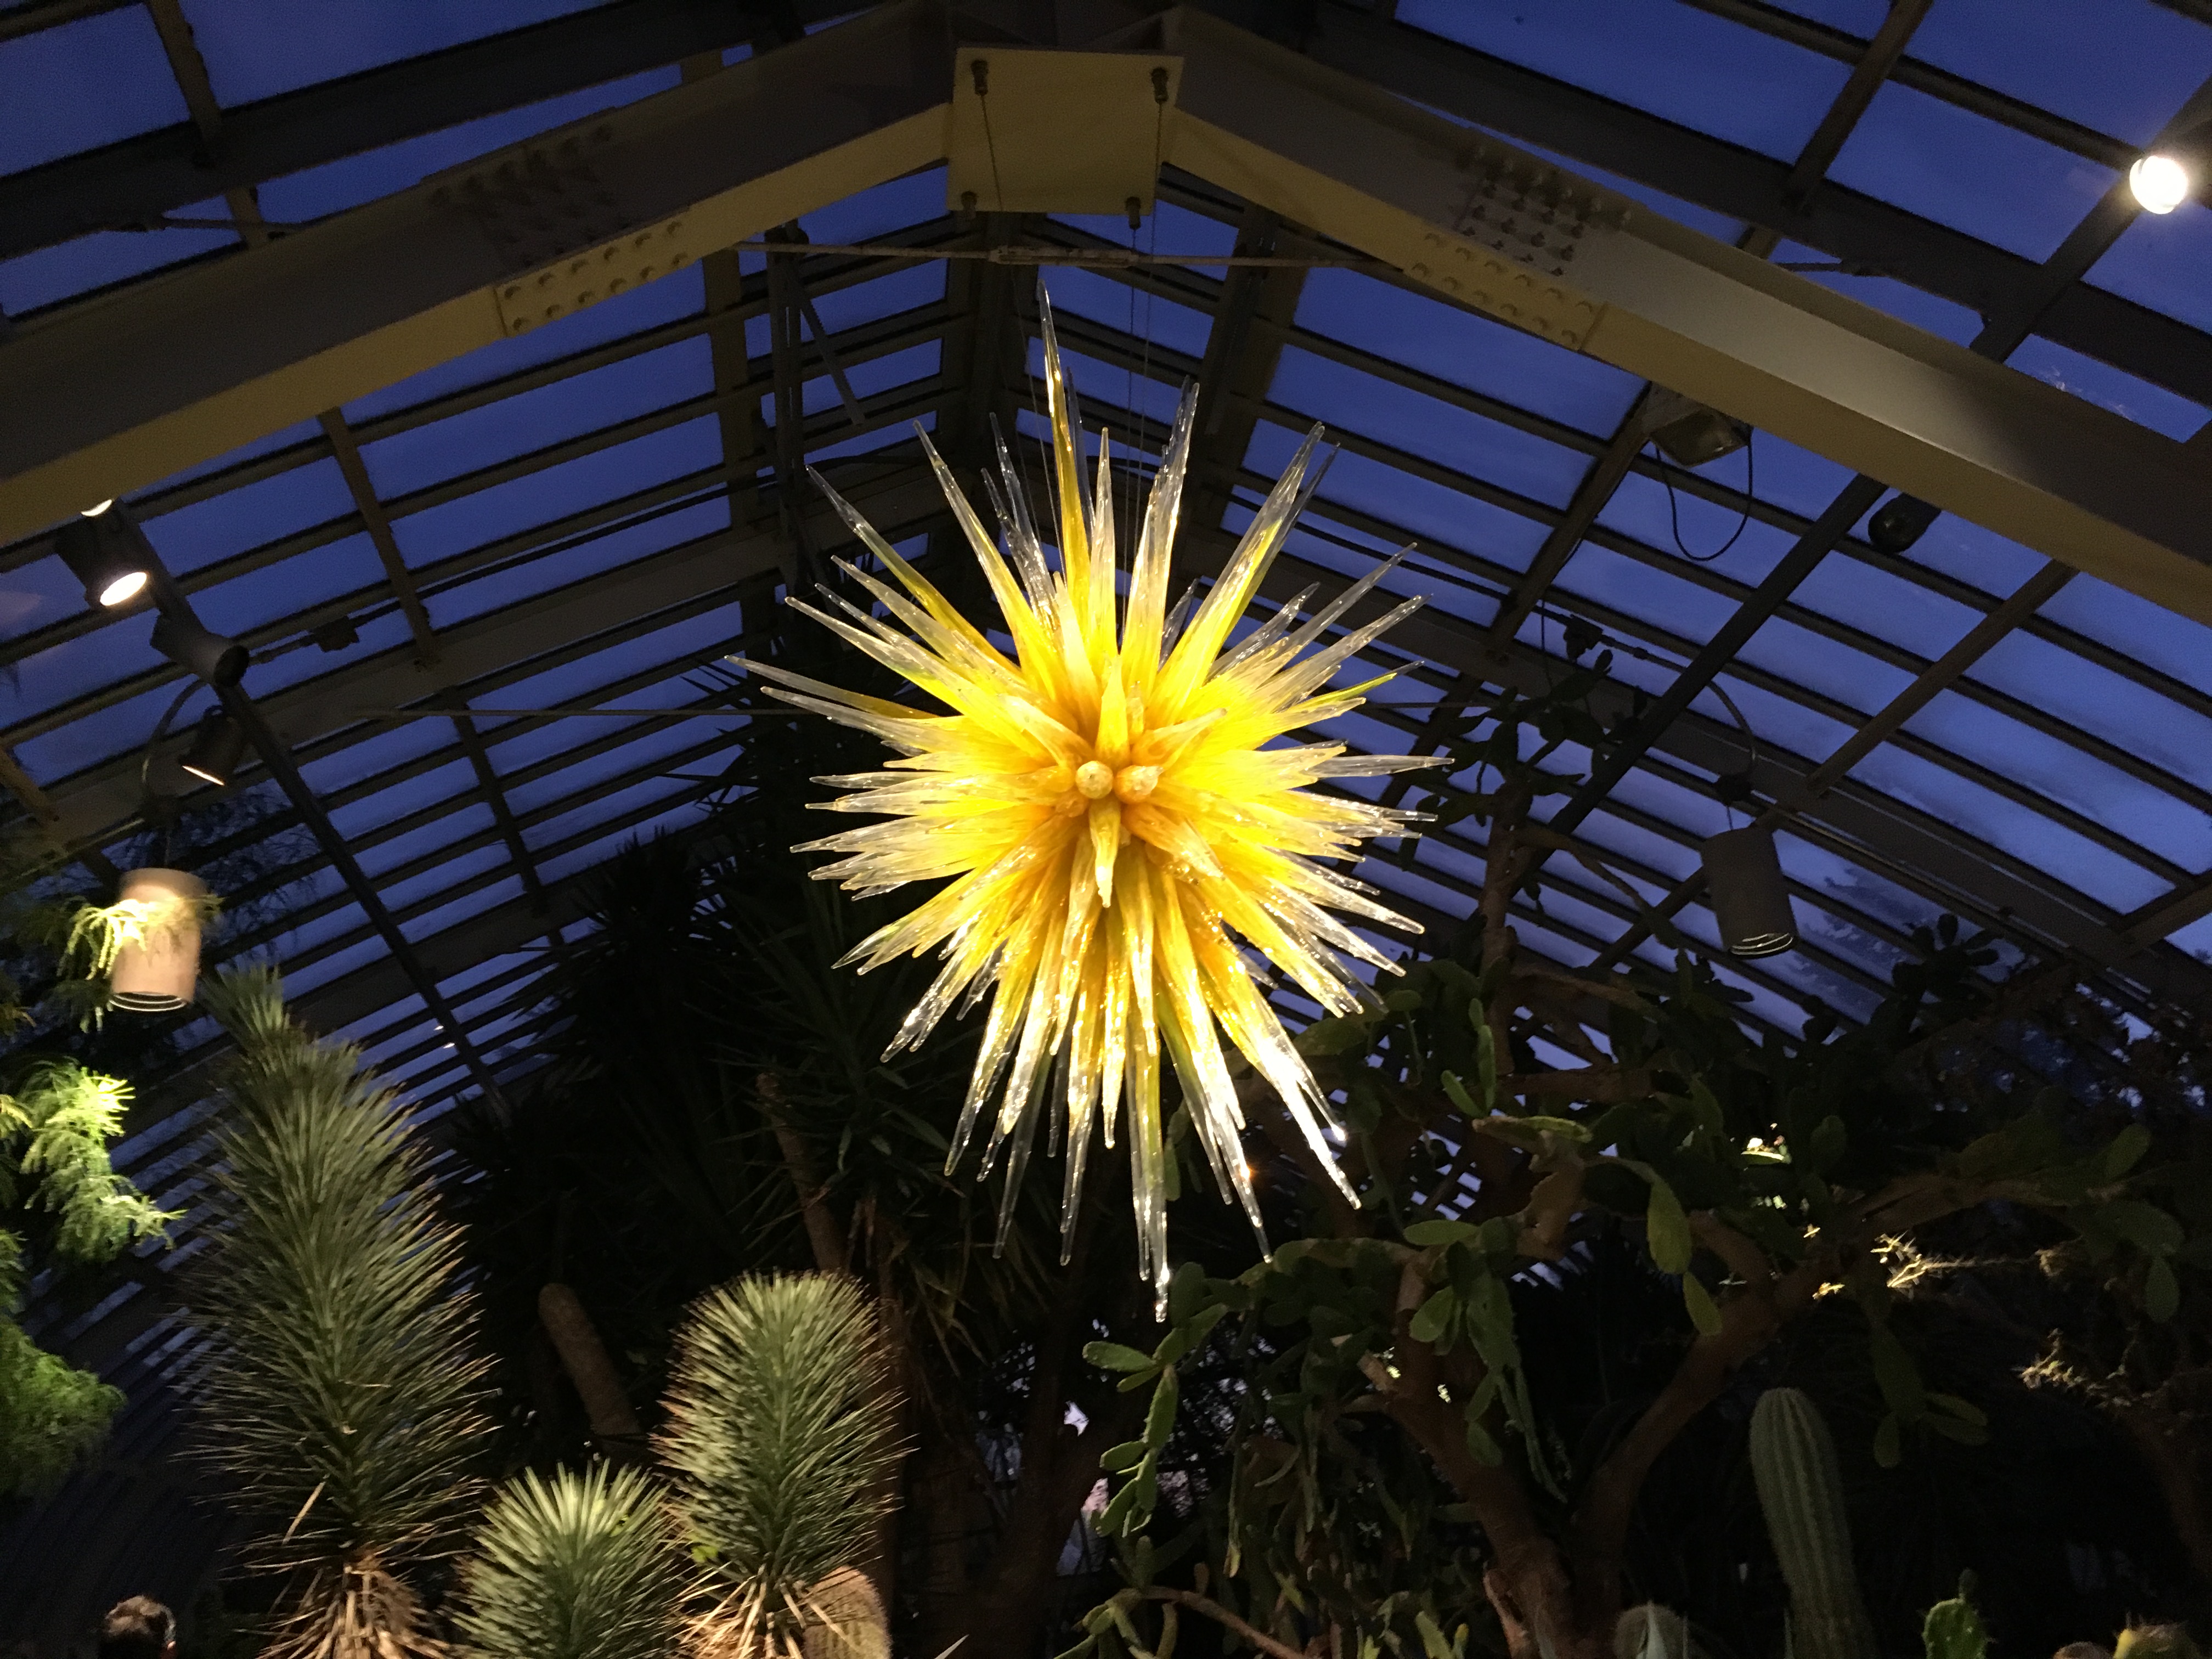 Phipps Conservatory - After Dark